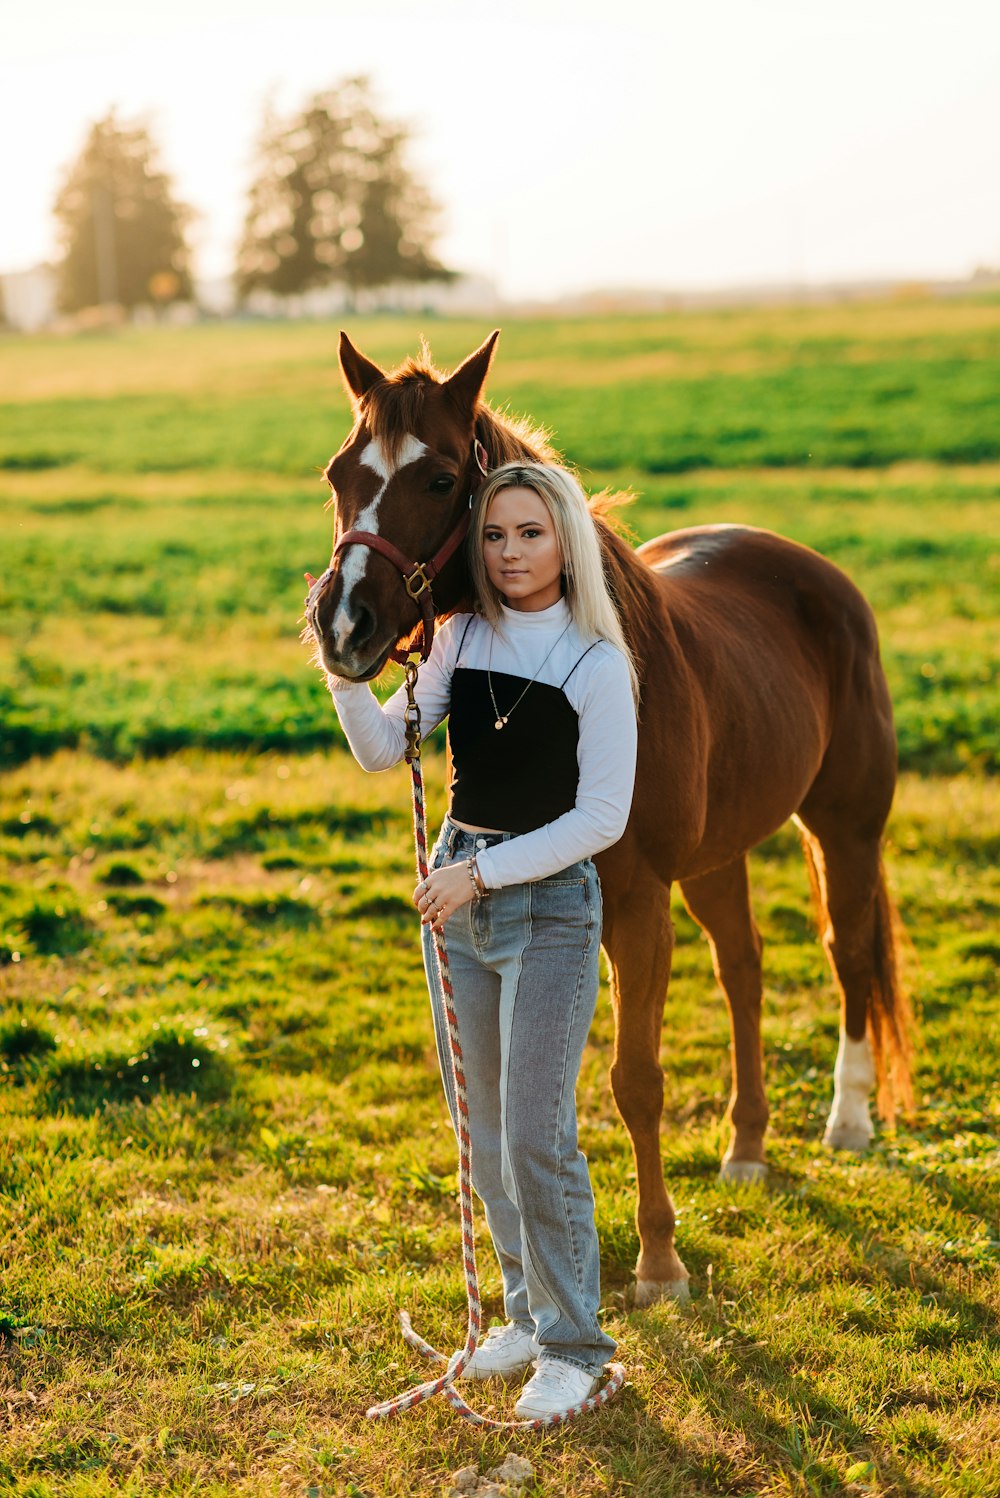 Girl With Horse Pictures | Download Free Images On Unsplash